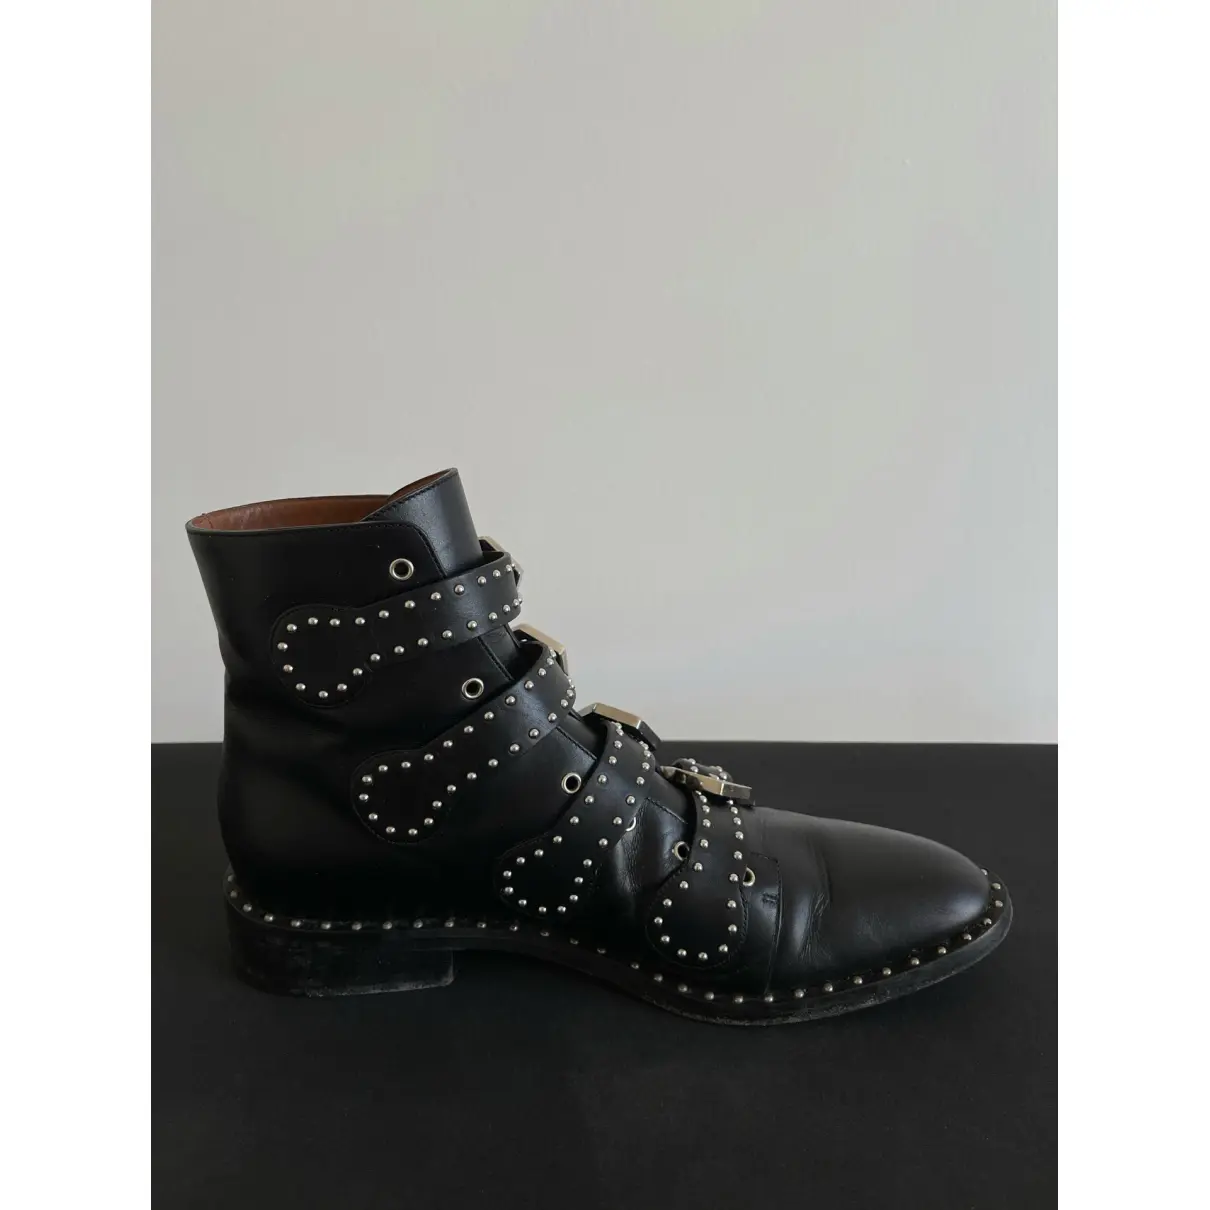 Buy Givenchy Leather ankle boots online